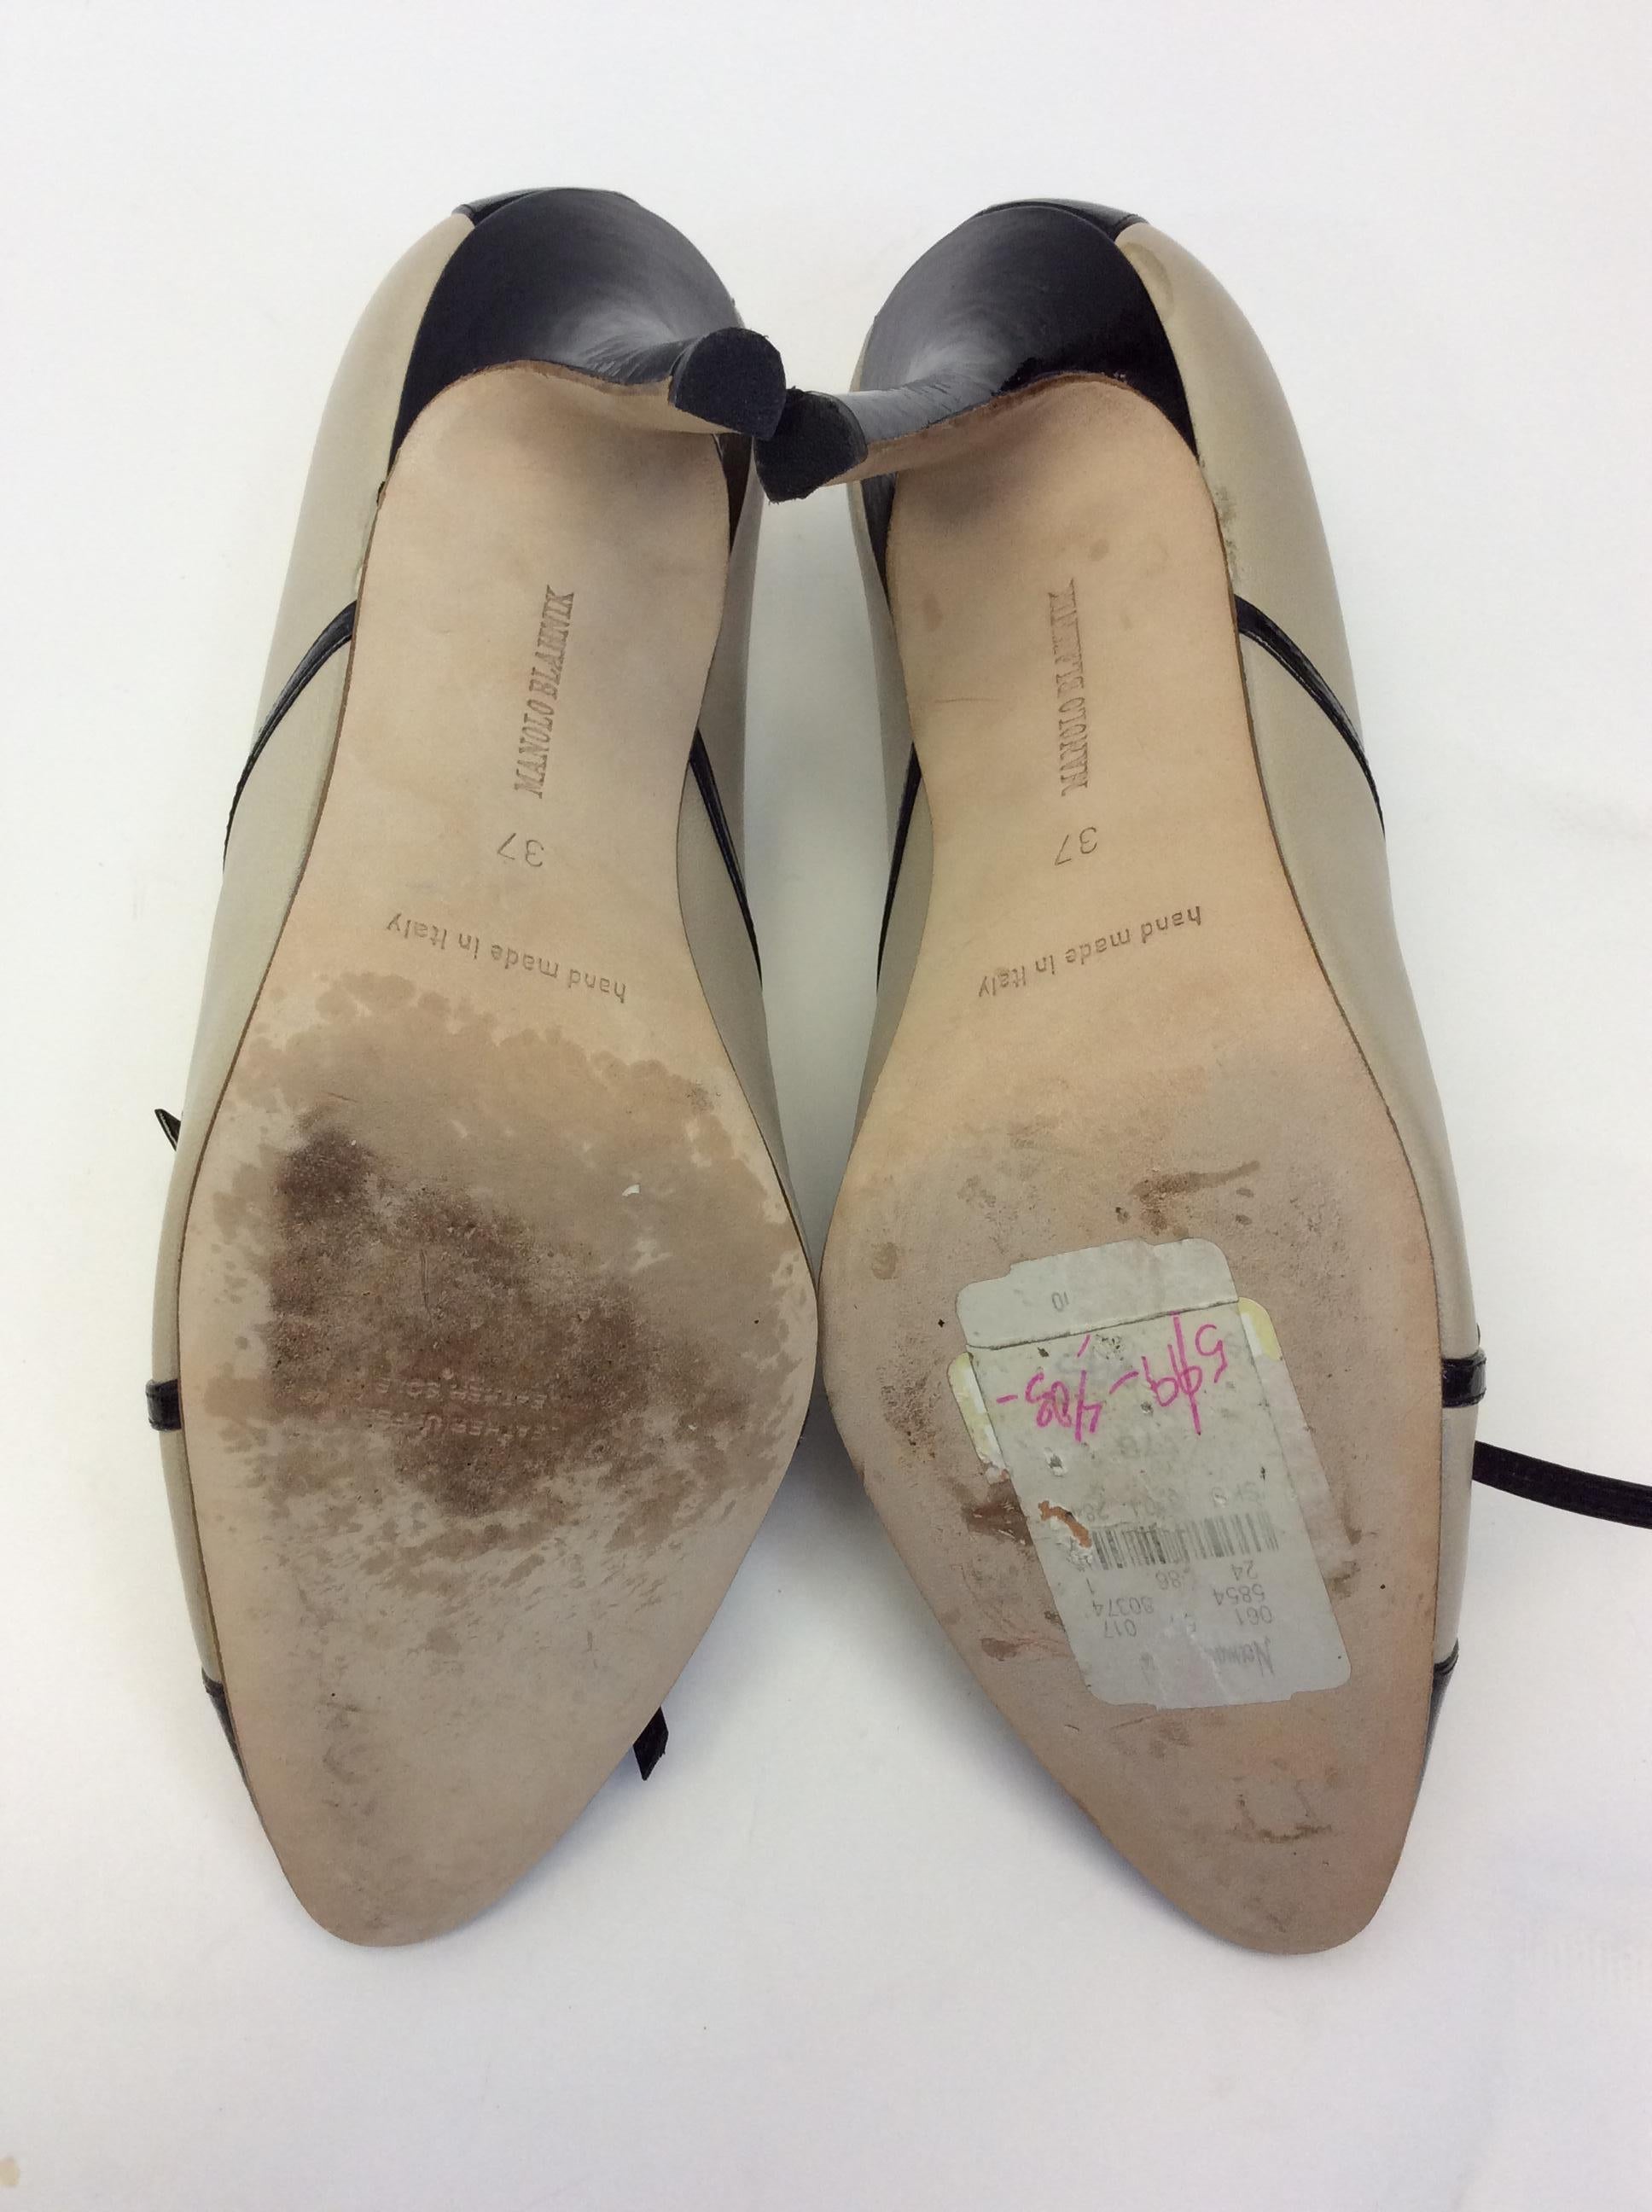 Manolo Blahnik Tan and Black Leather Heels For Sale 3